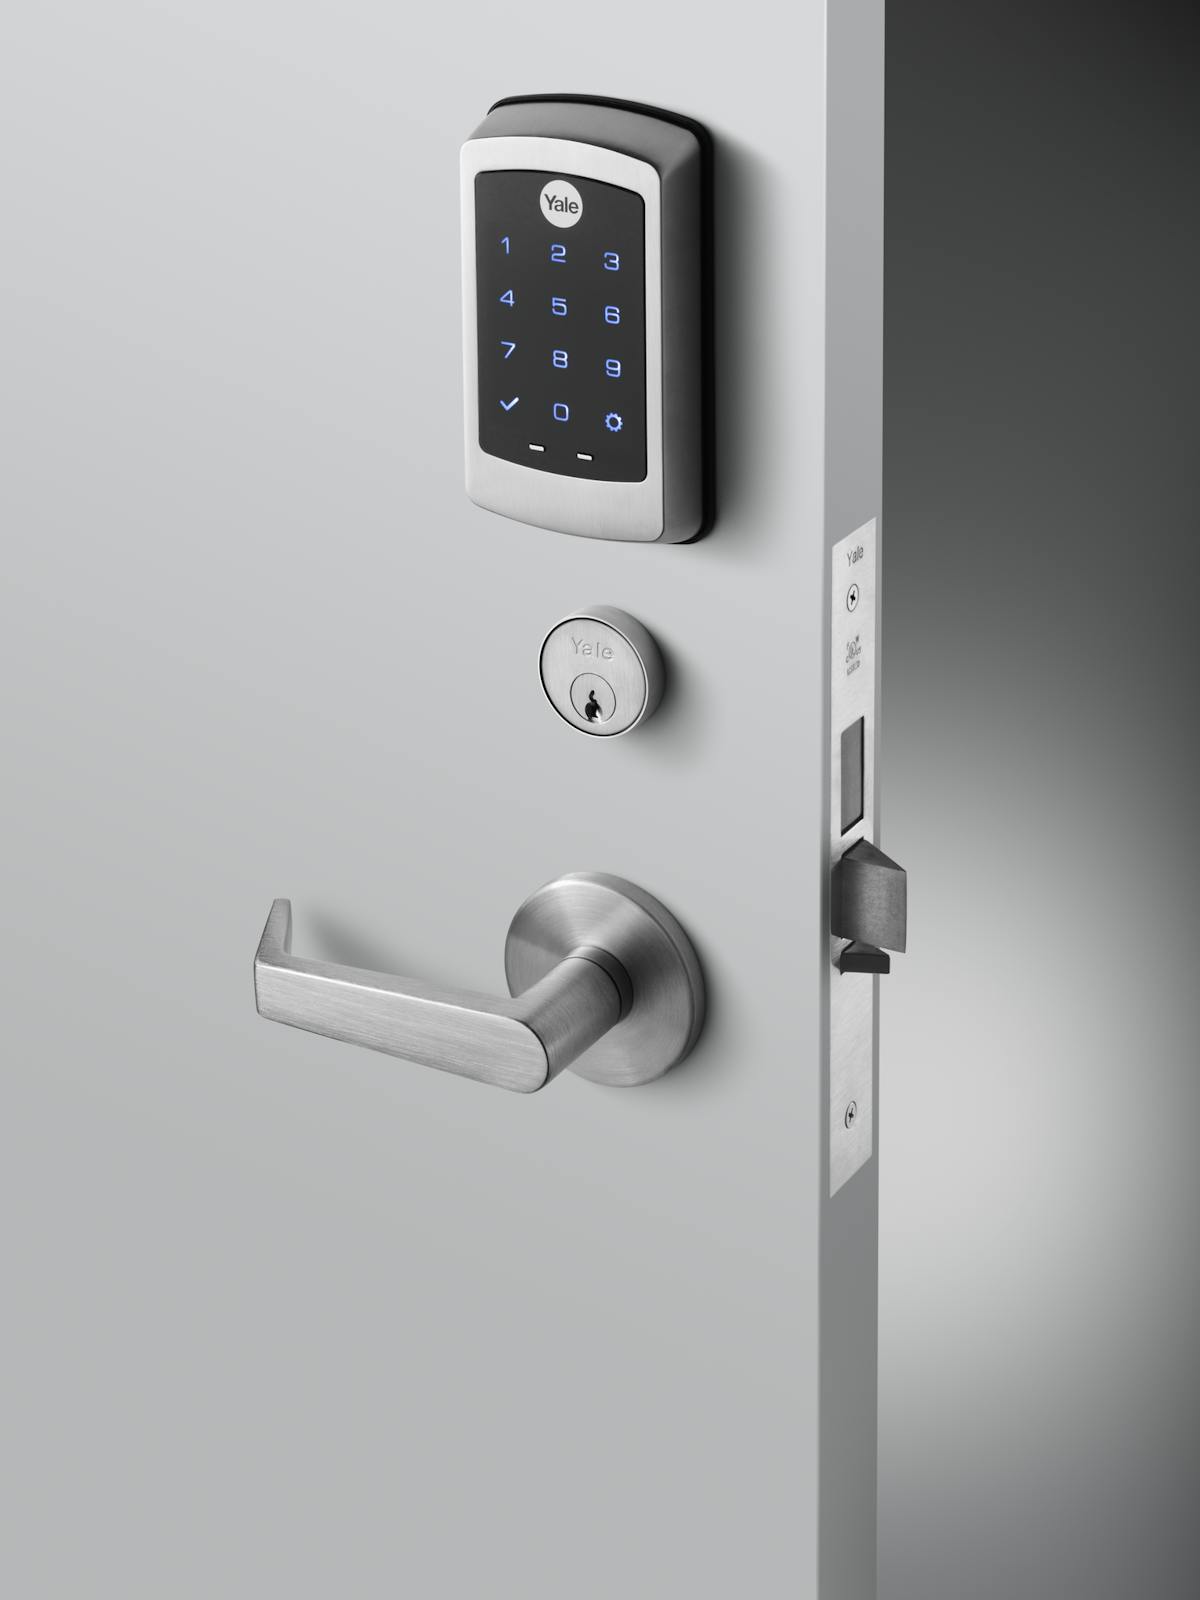 nexTouch can be used as a stand-alone keypad lock that uses a PIN code to manage access; can easily be upgraded to utilize Data-on-Card technology as part of the Yale Multi-Family Solution.